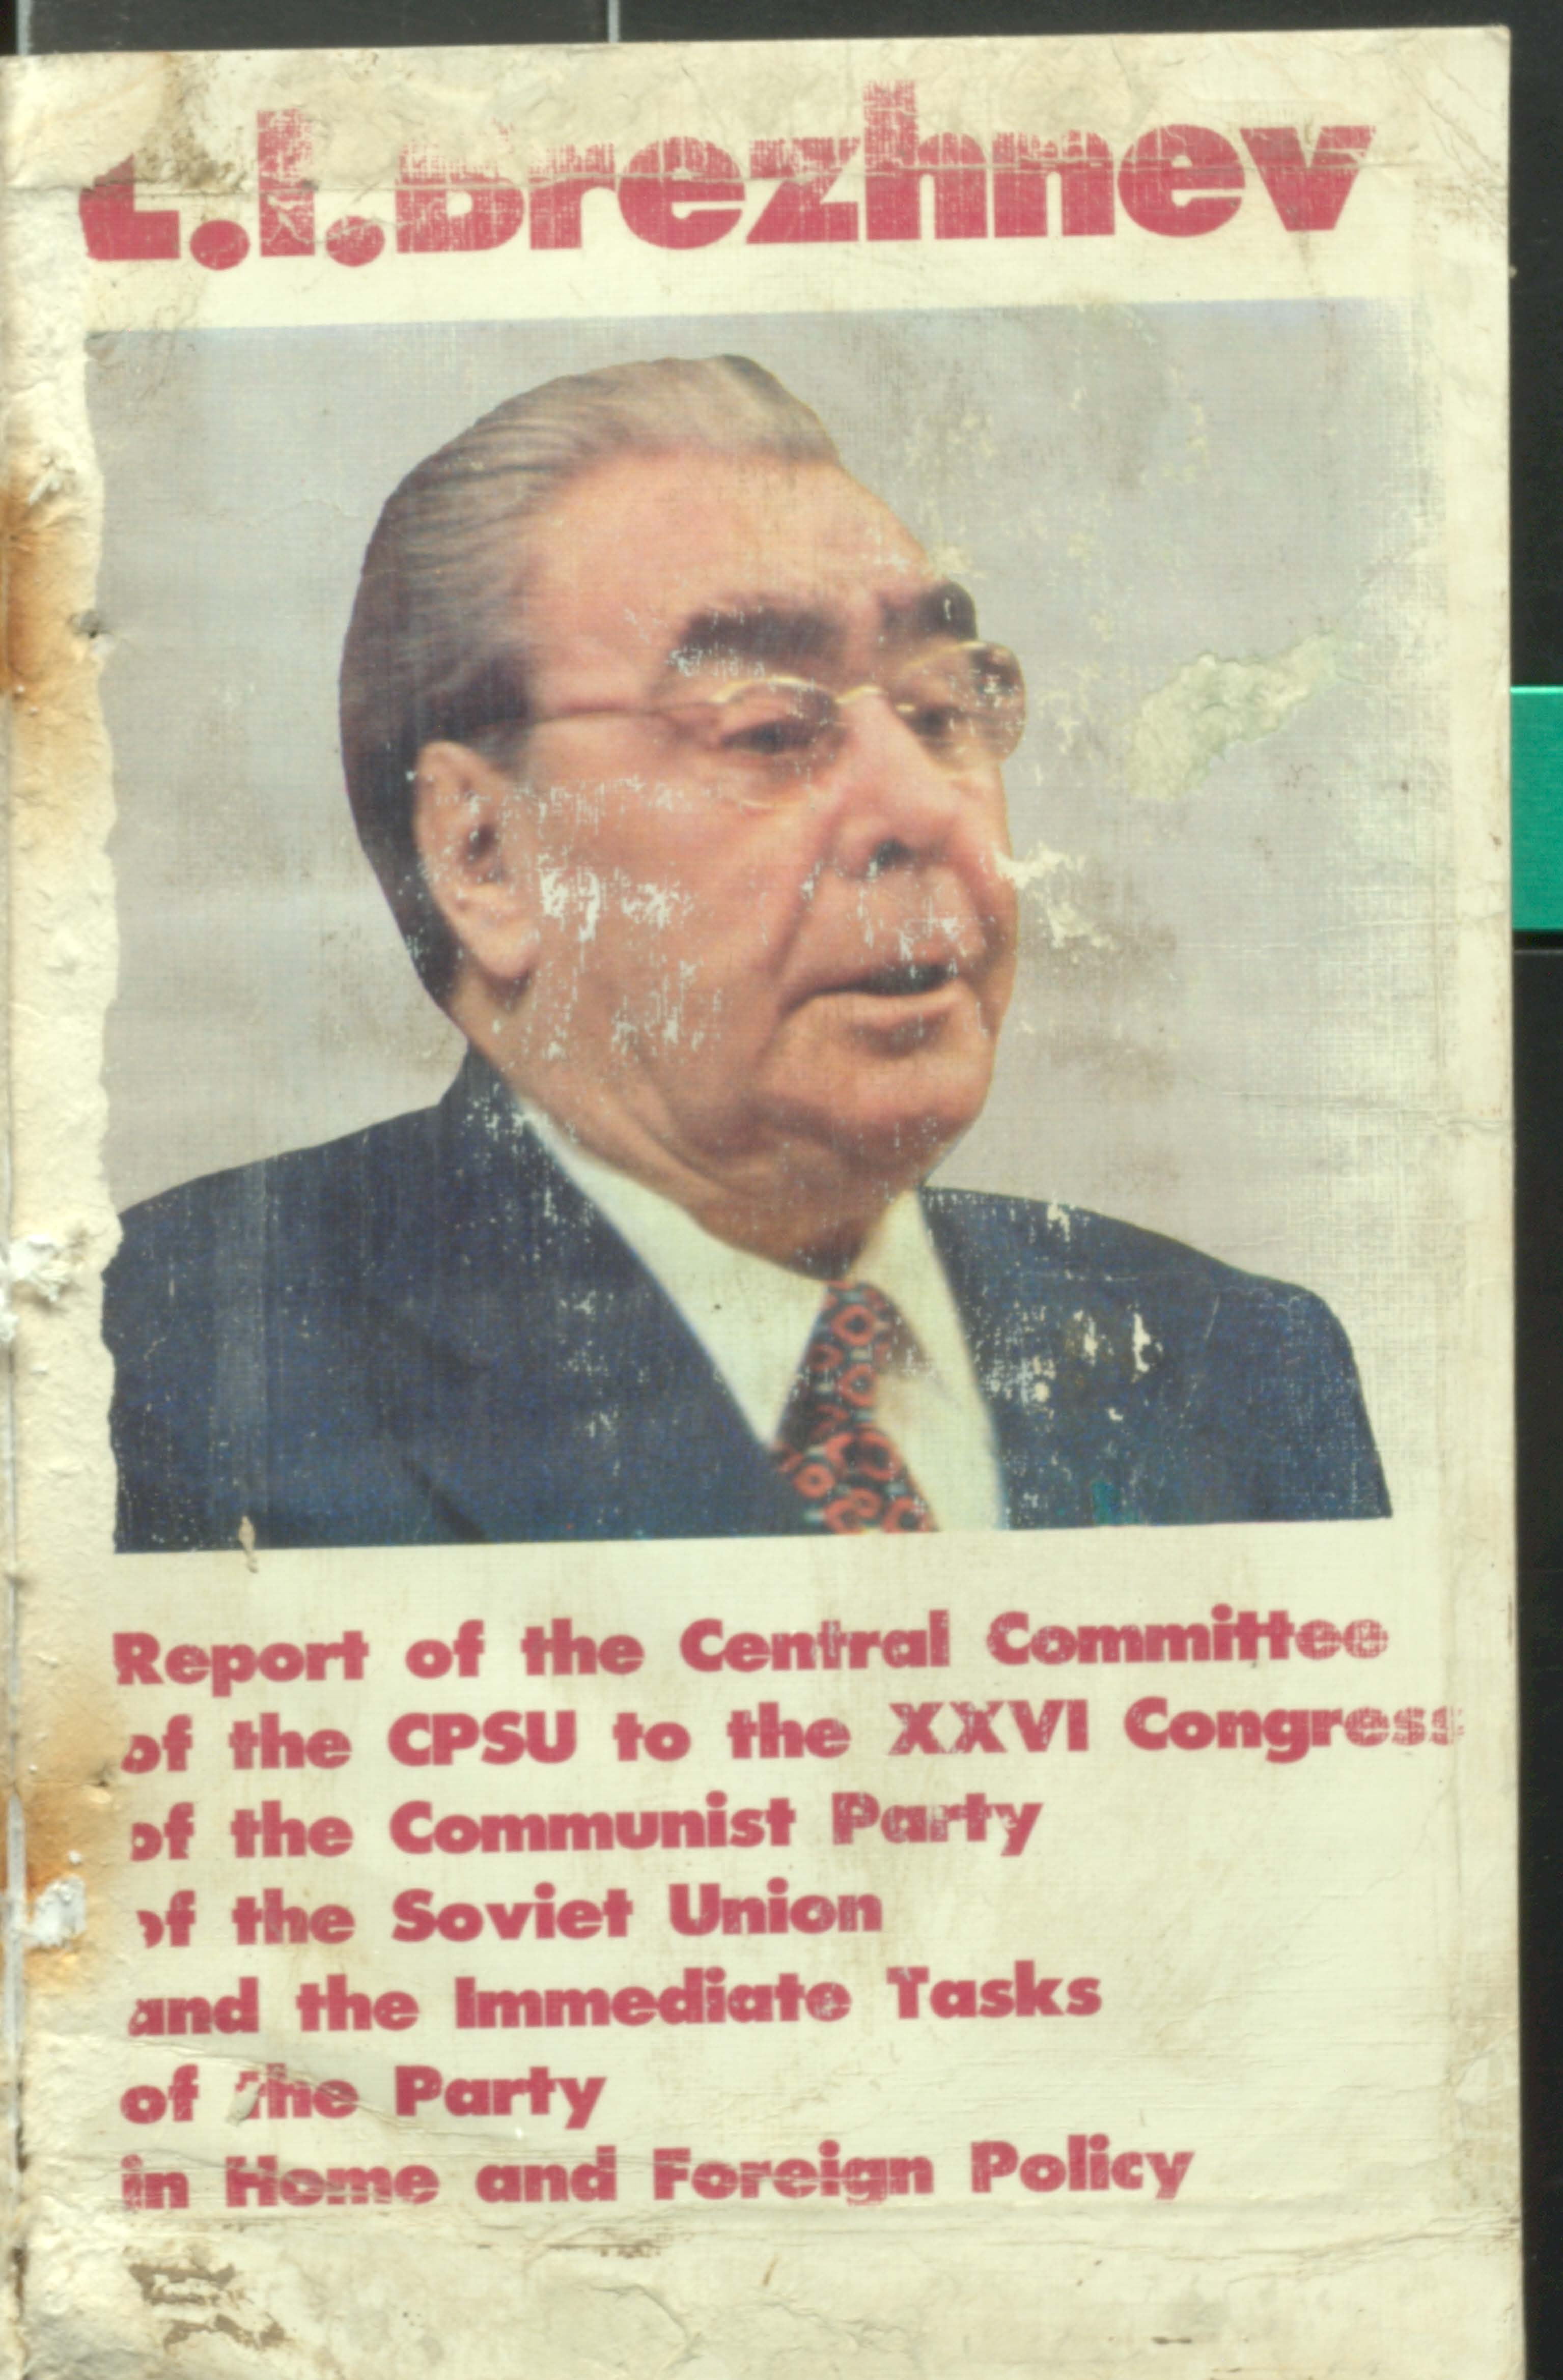 Report of the Central Committee of the CPSU